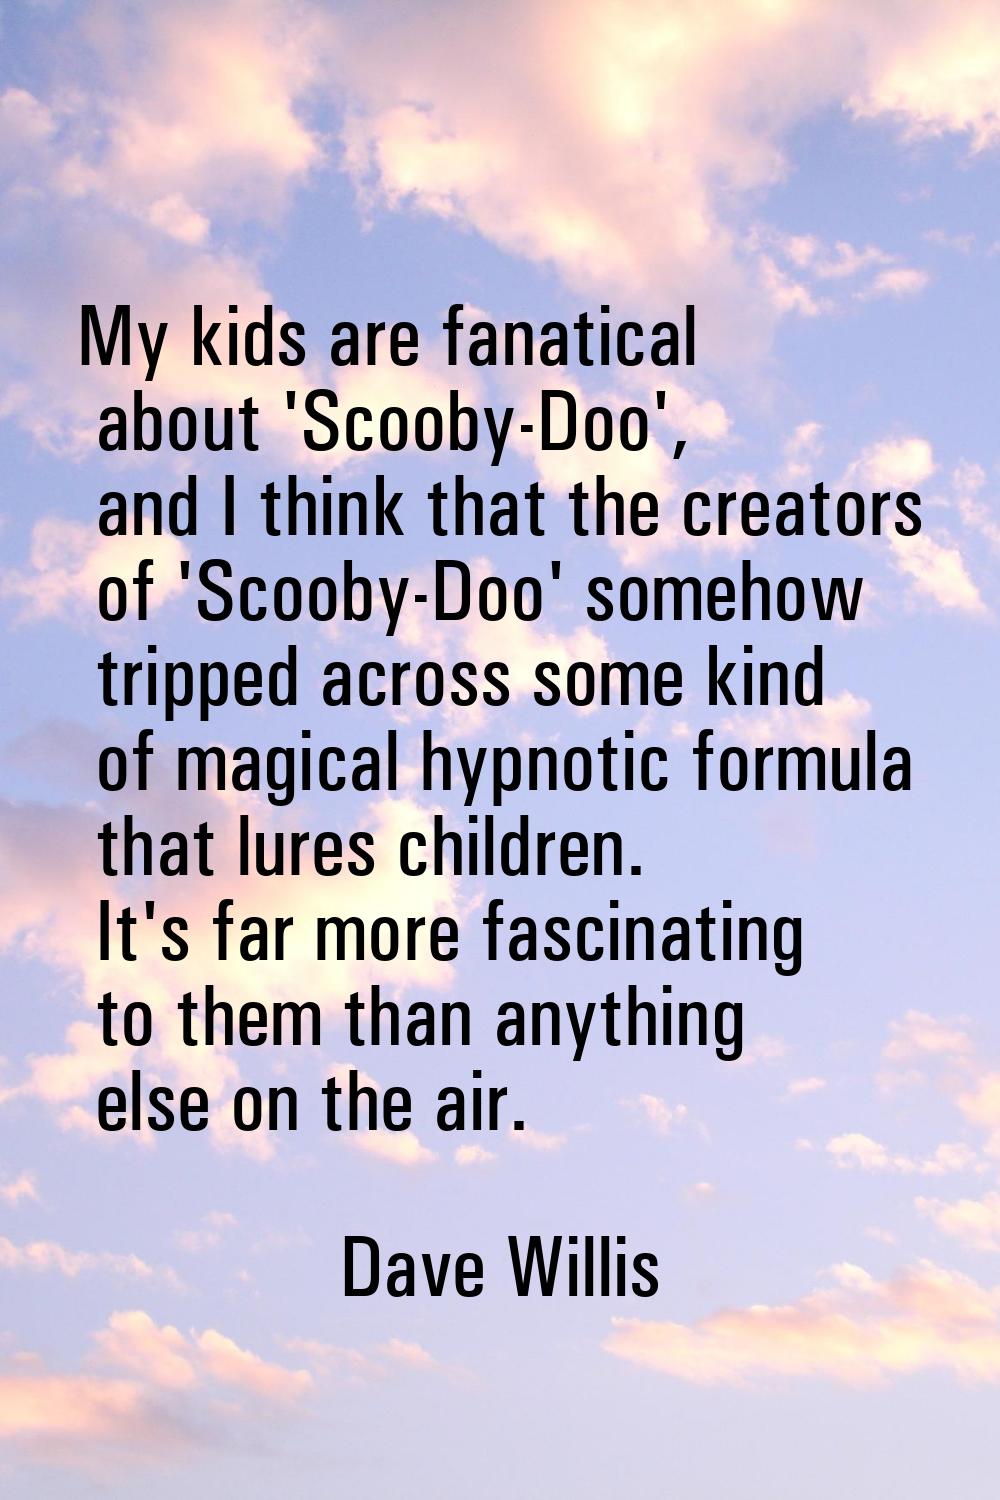 My kids are fanatical about 'Scooby-Doo', and I think that the creators of 'Scooby-Doo' somehow tri